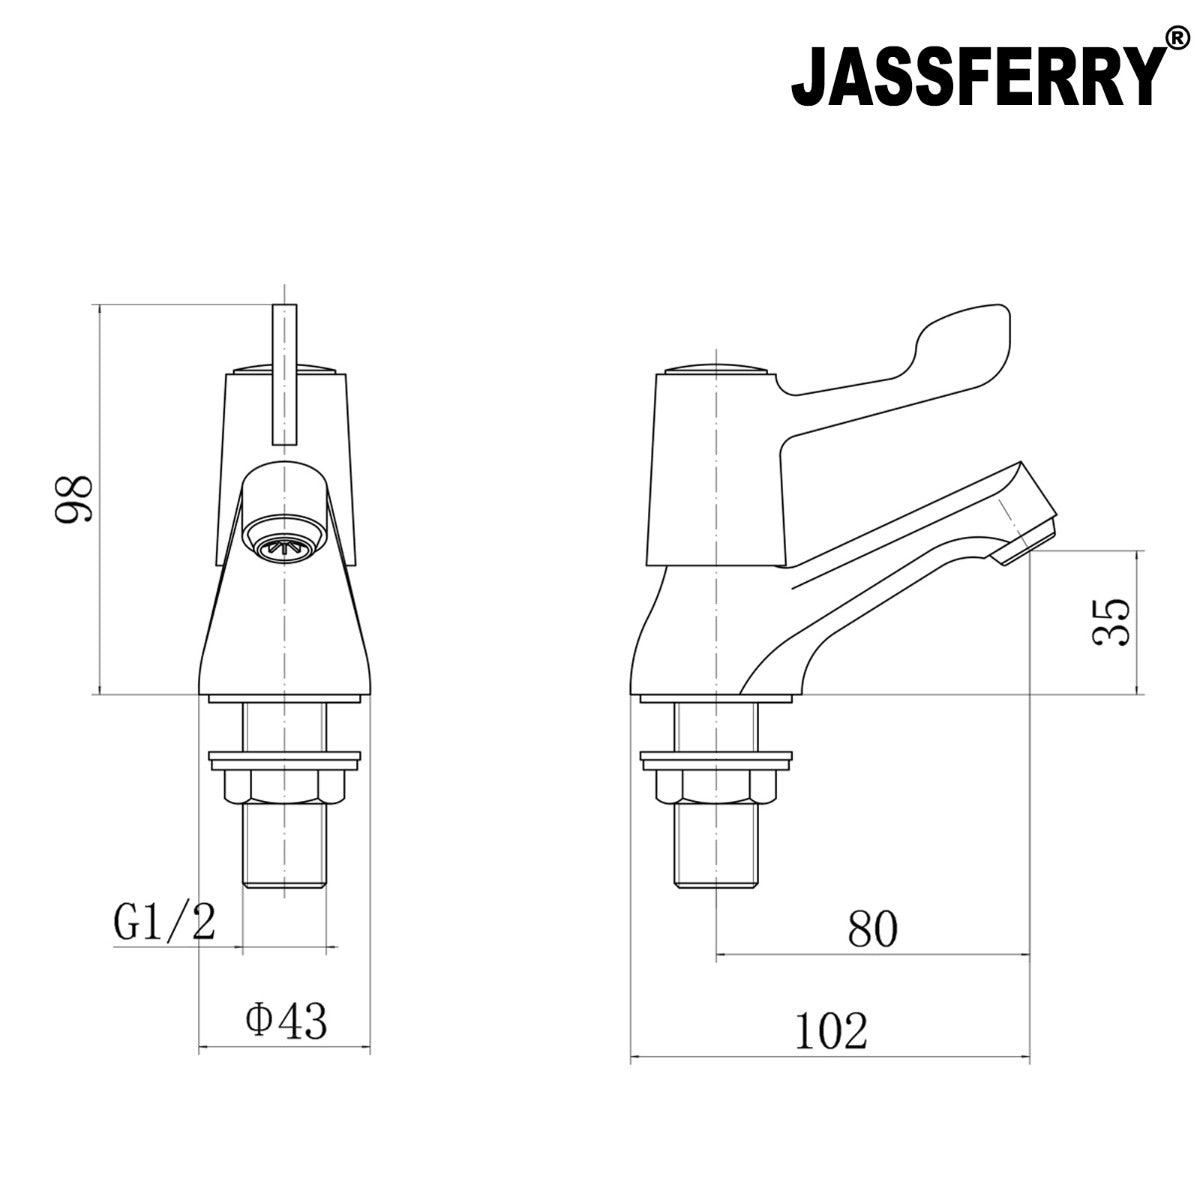 JassferryJASSFERRY 1/2" Basin Taps Pair Traditional Twin Hot & Cold Set FaucetBasin Taps